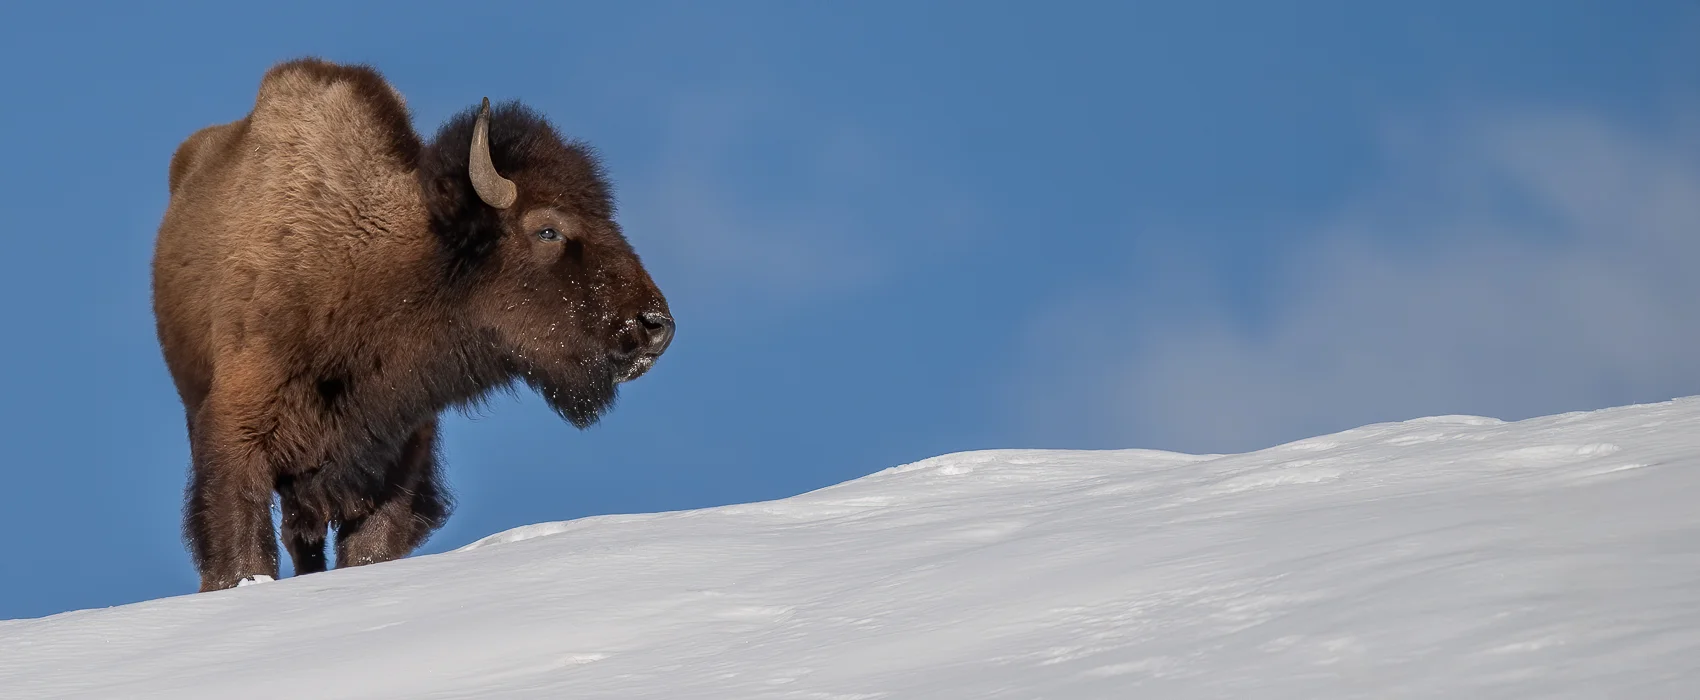 bison in snow at winter photography Tours by alpenglow tours